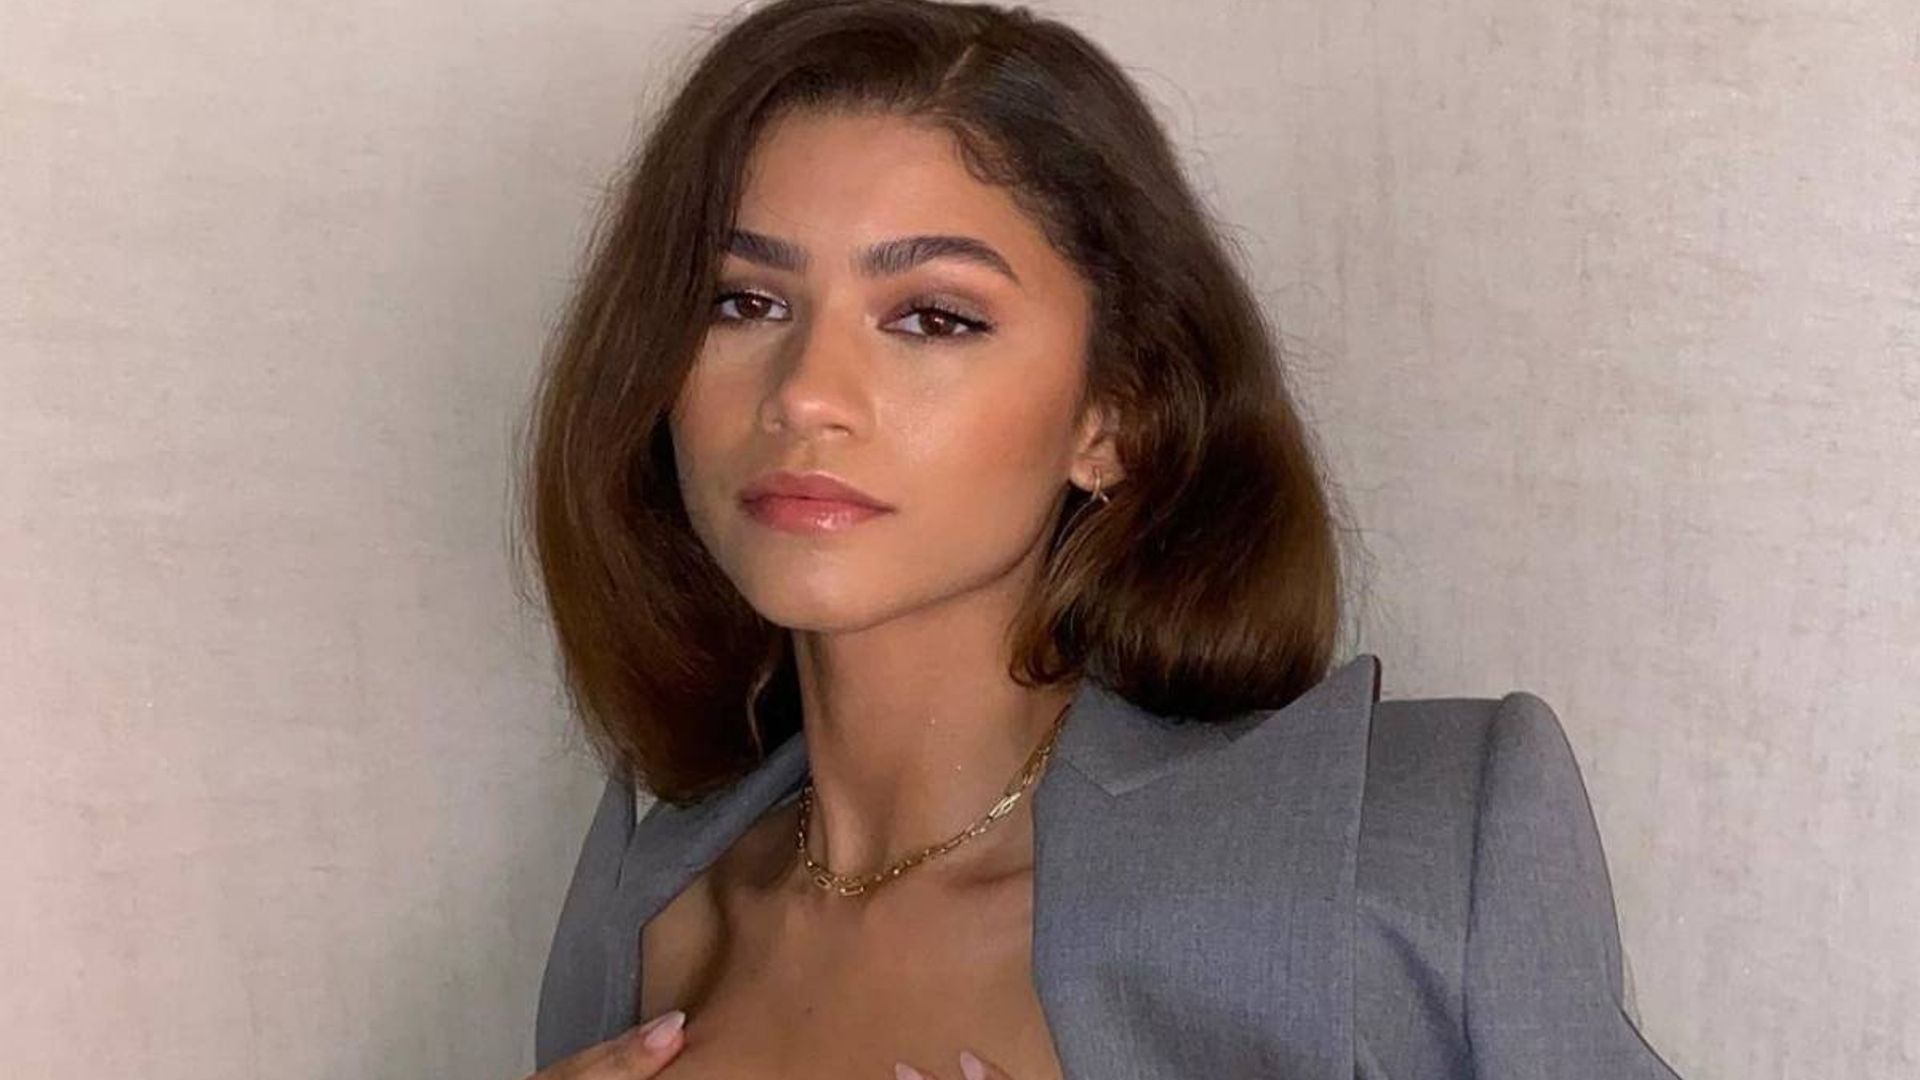 Zendaya stuns in first style moment of the year - and it’s everything we needed to kick off 2021